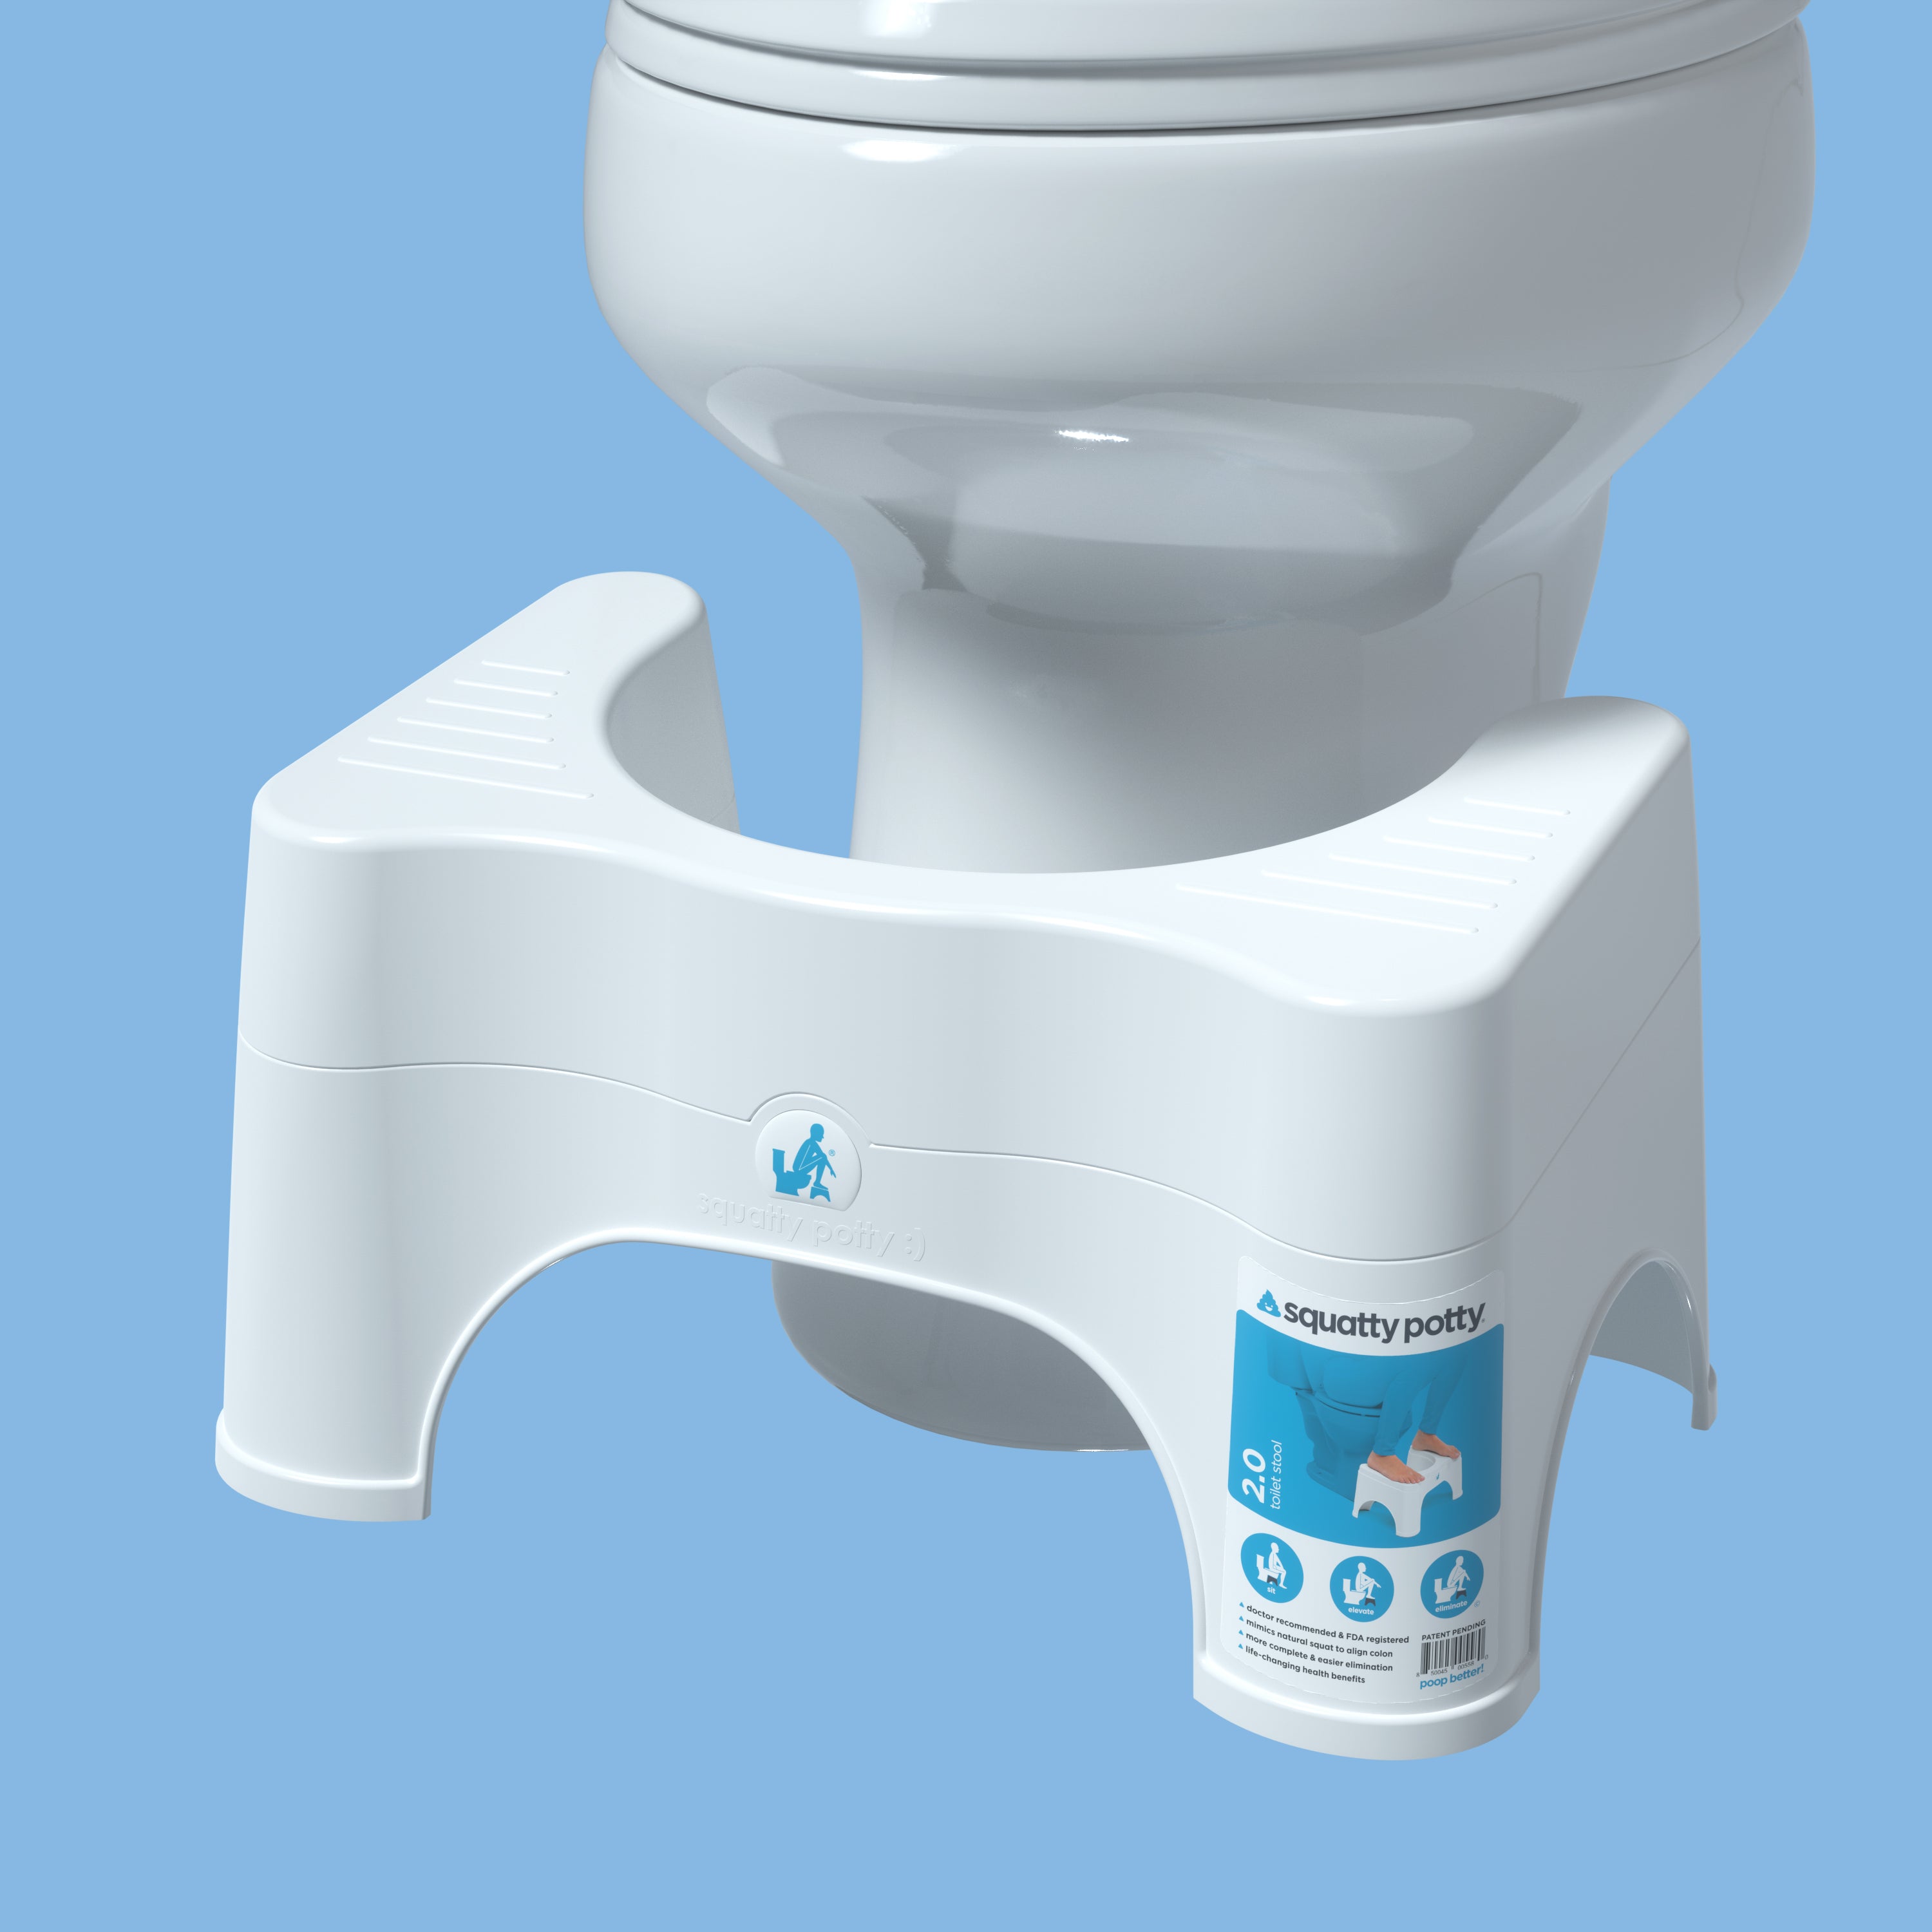 Should we use a 'Squatty Potty' instead of a normal toilet?